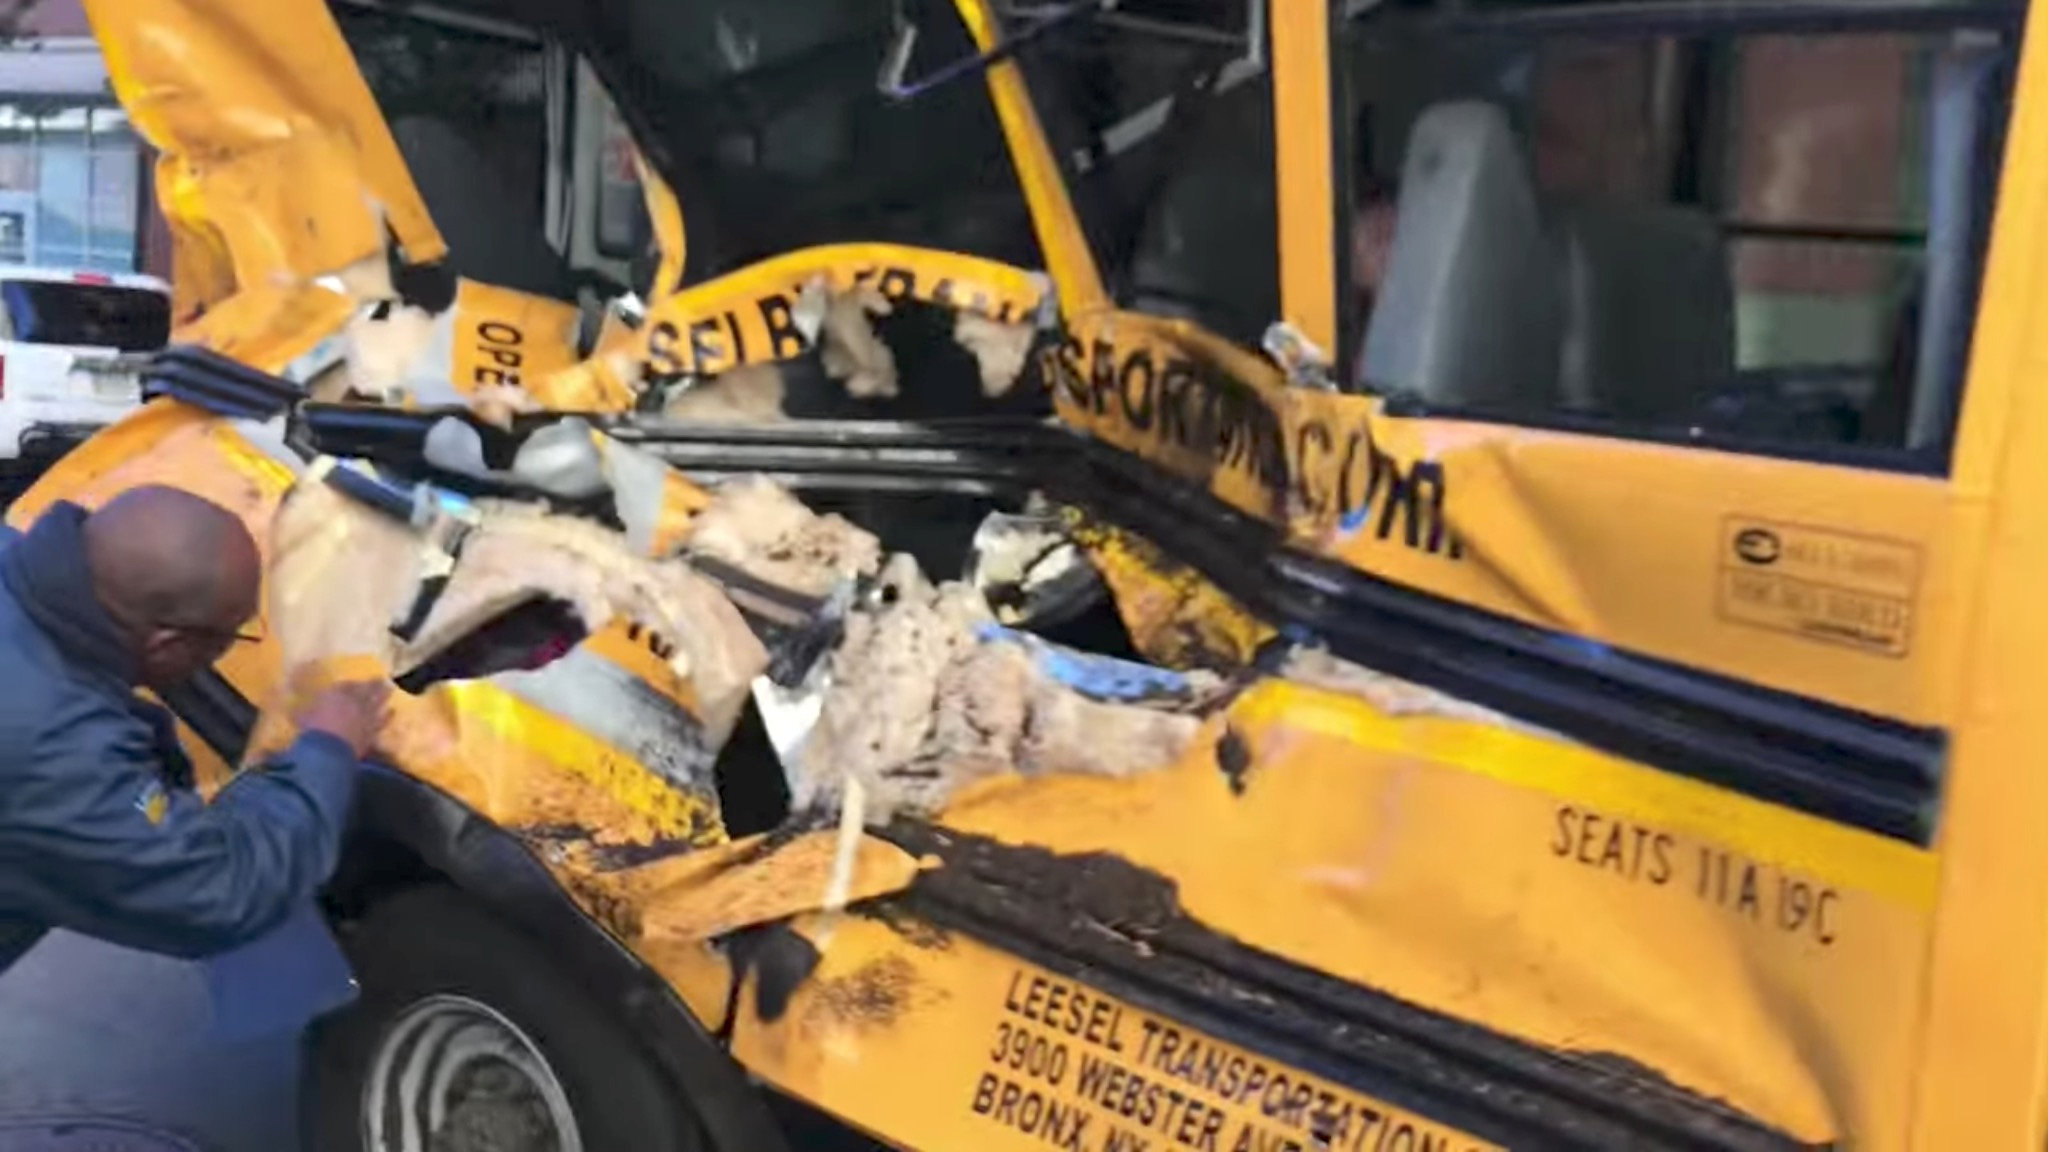 A damaged school bus is seen at the scene of a pickup truck attack in Manhattan, New York, U.S., October 31, 2017 in this picture obtained from social media.